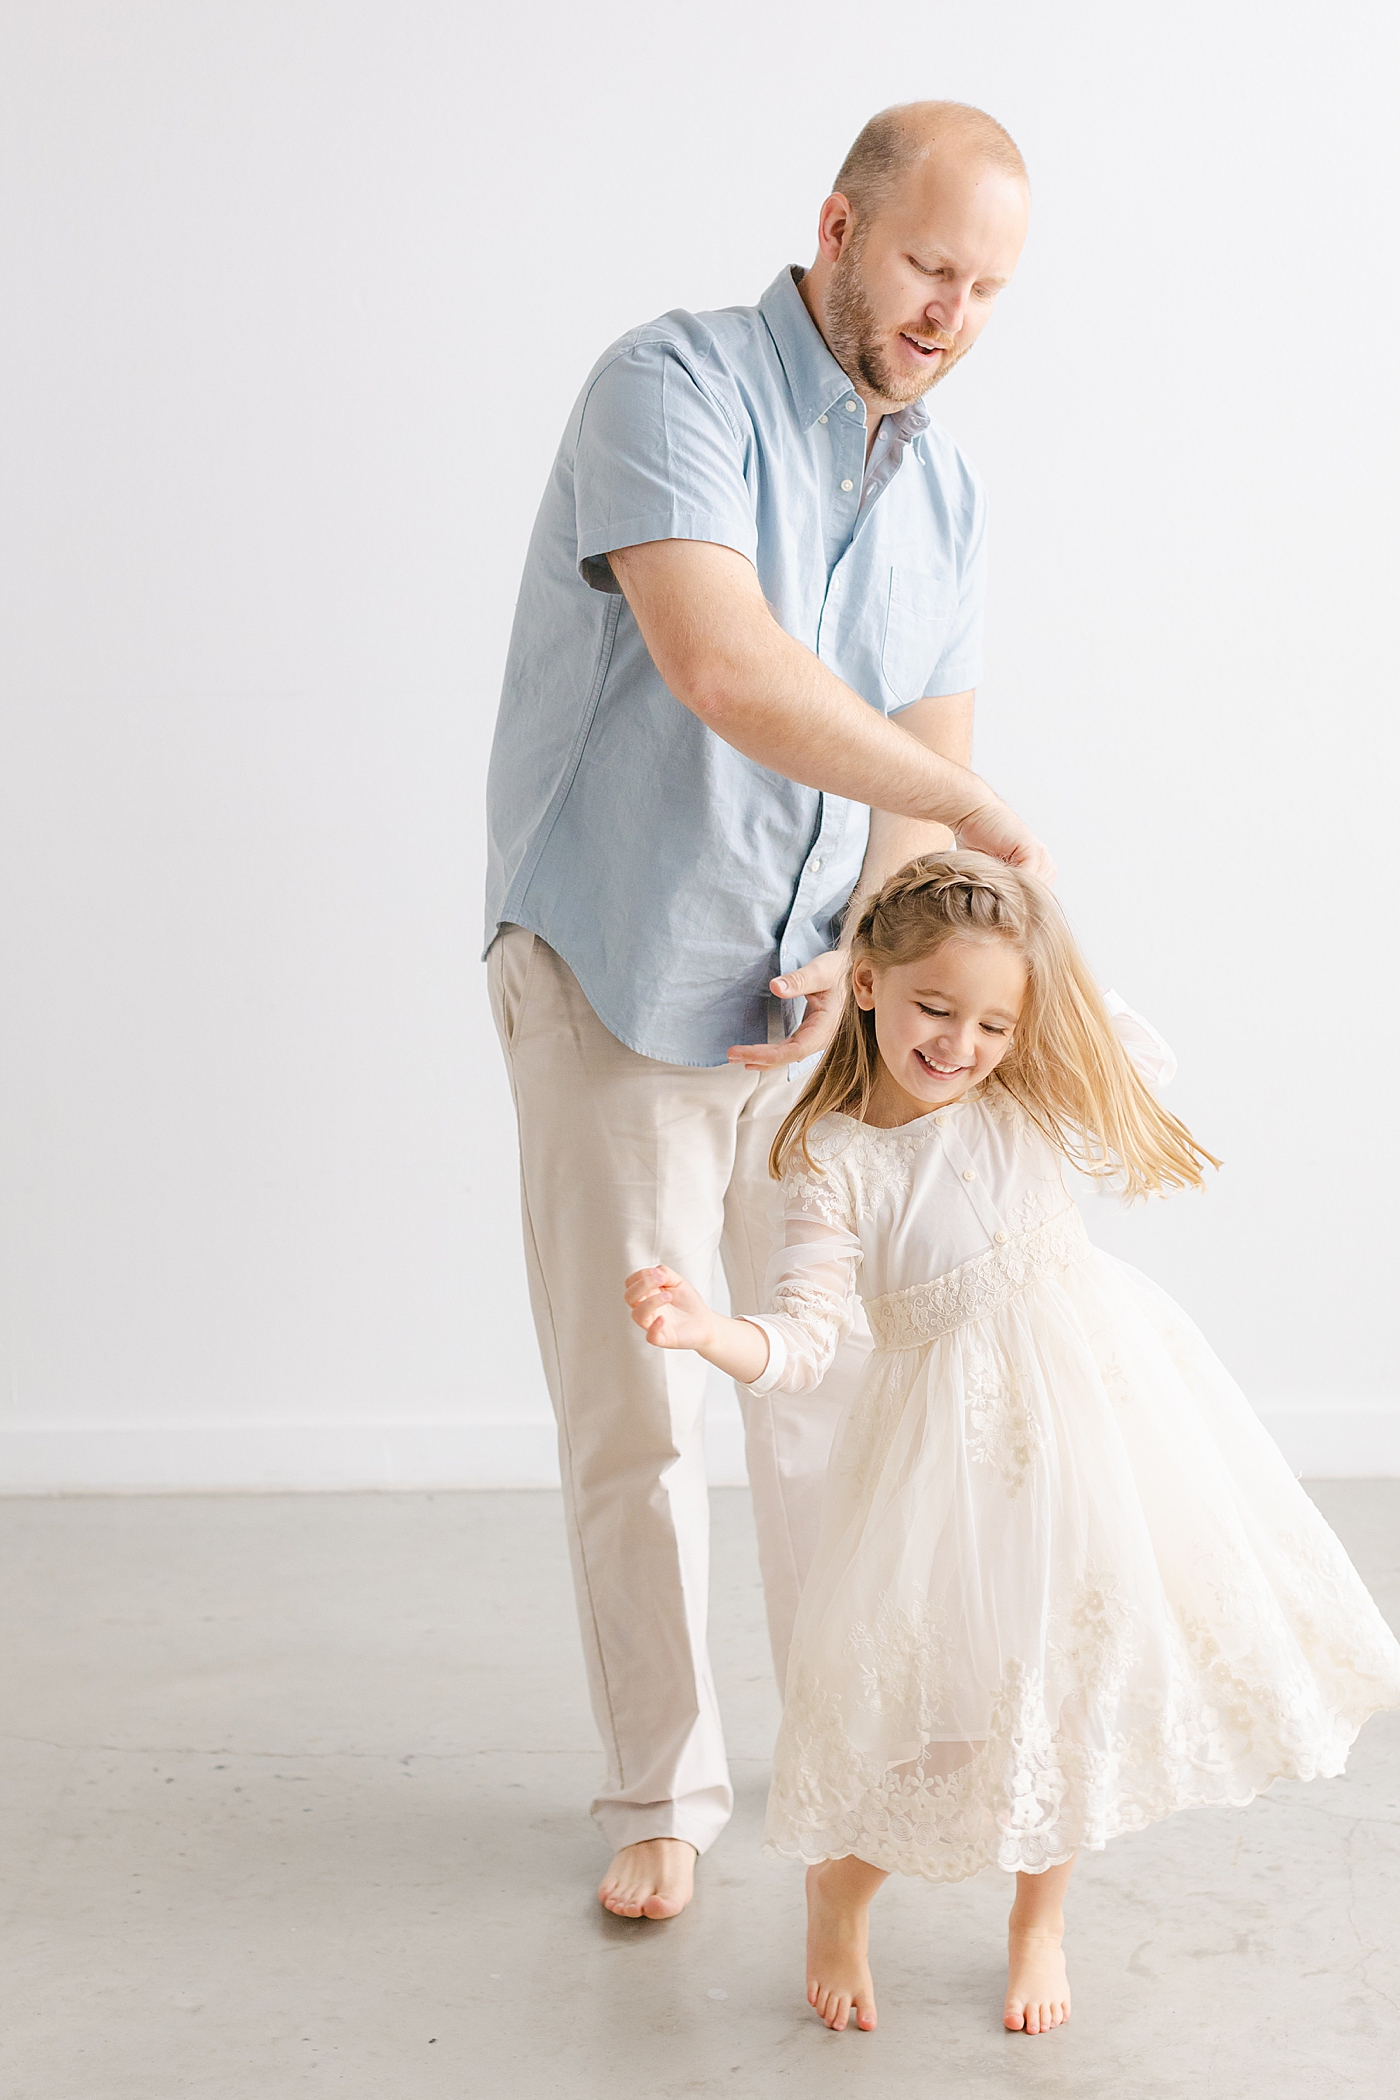 Dad twirling his little girl during their playful family studio session in Austin | Photo by Sana Ahmed Photography